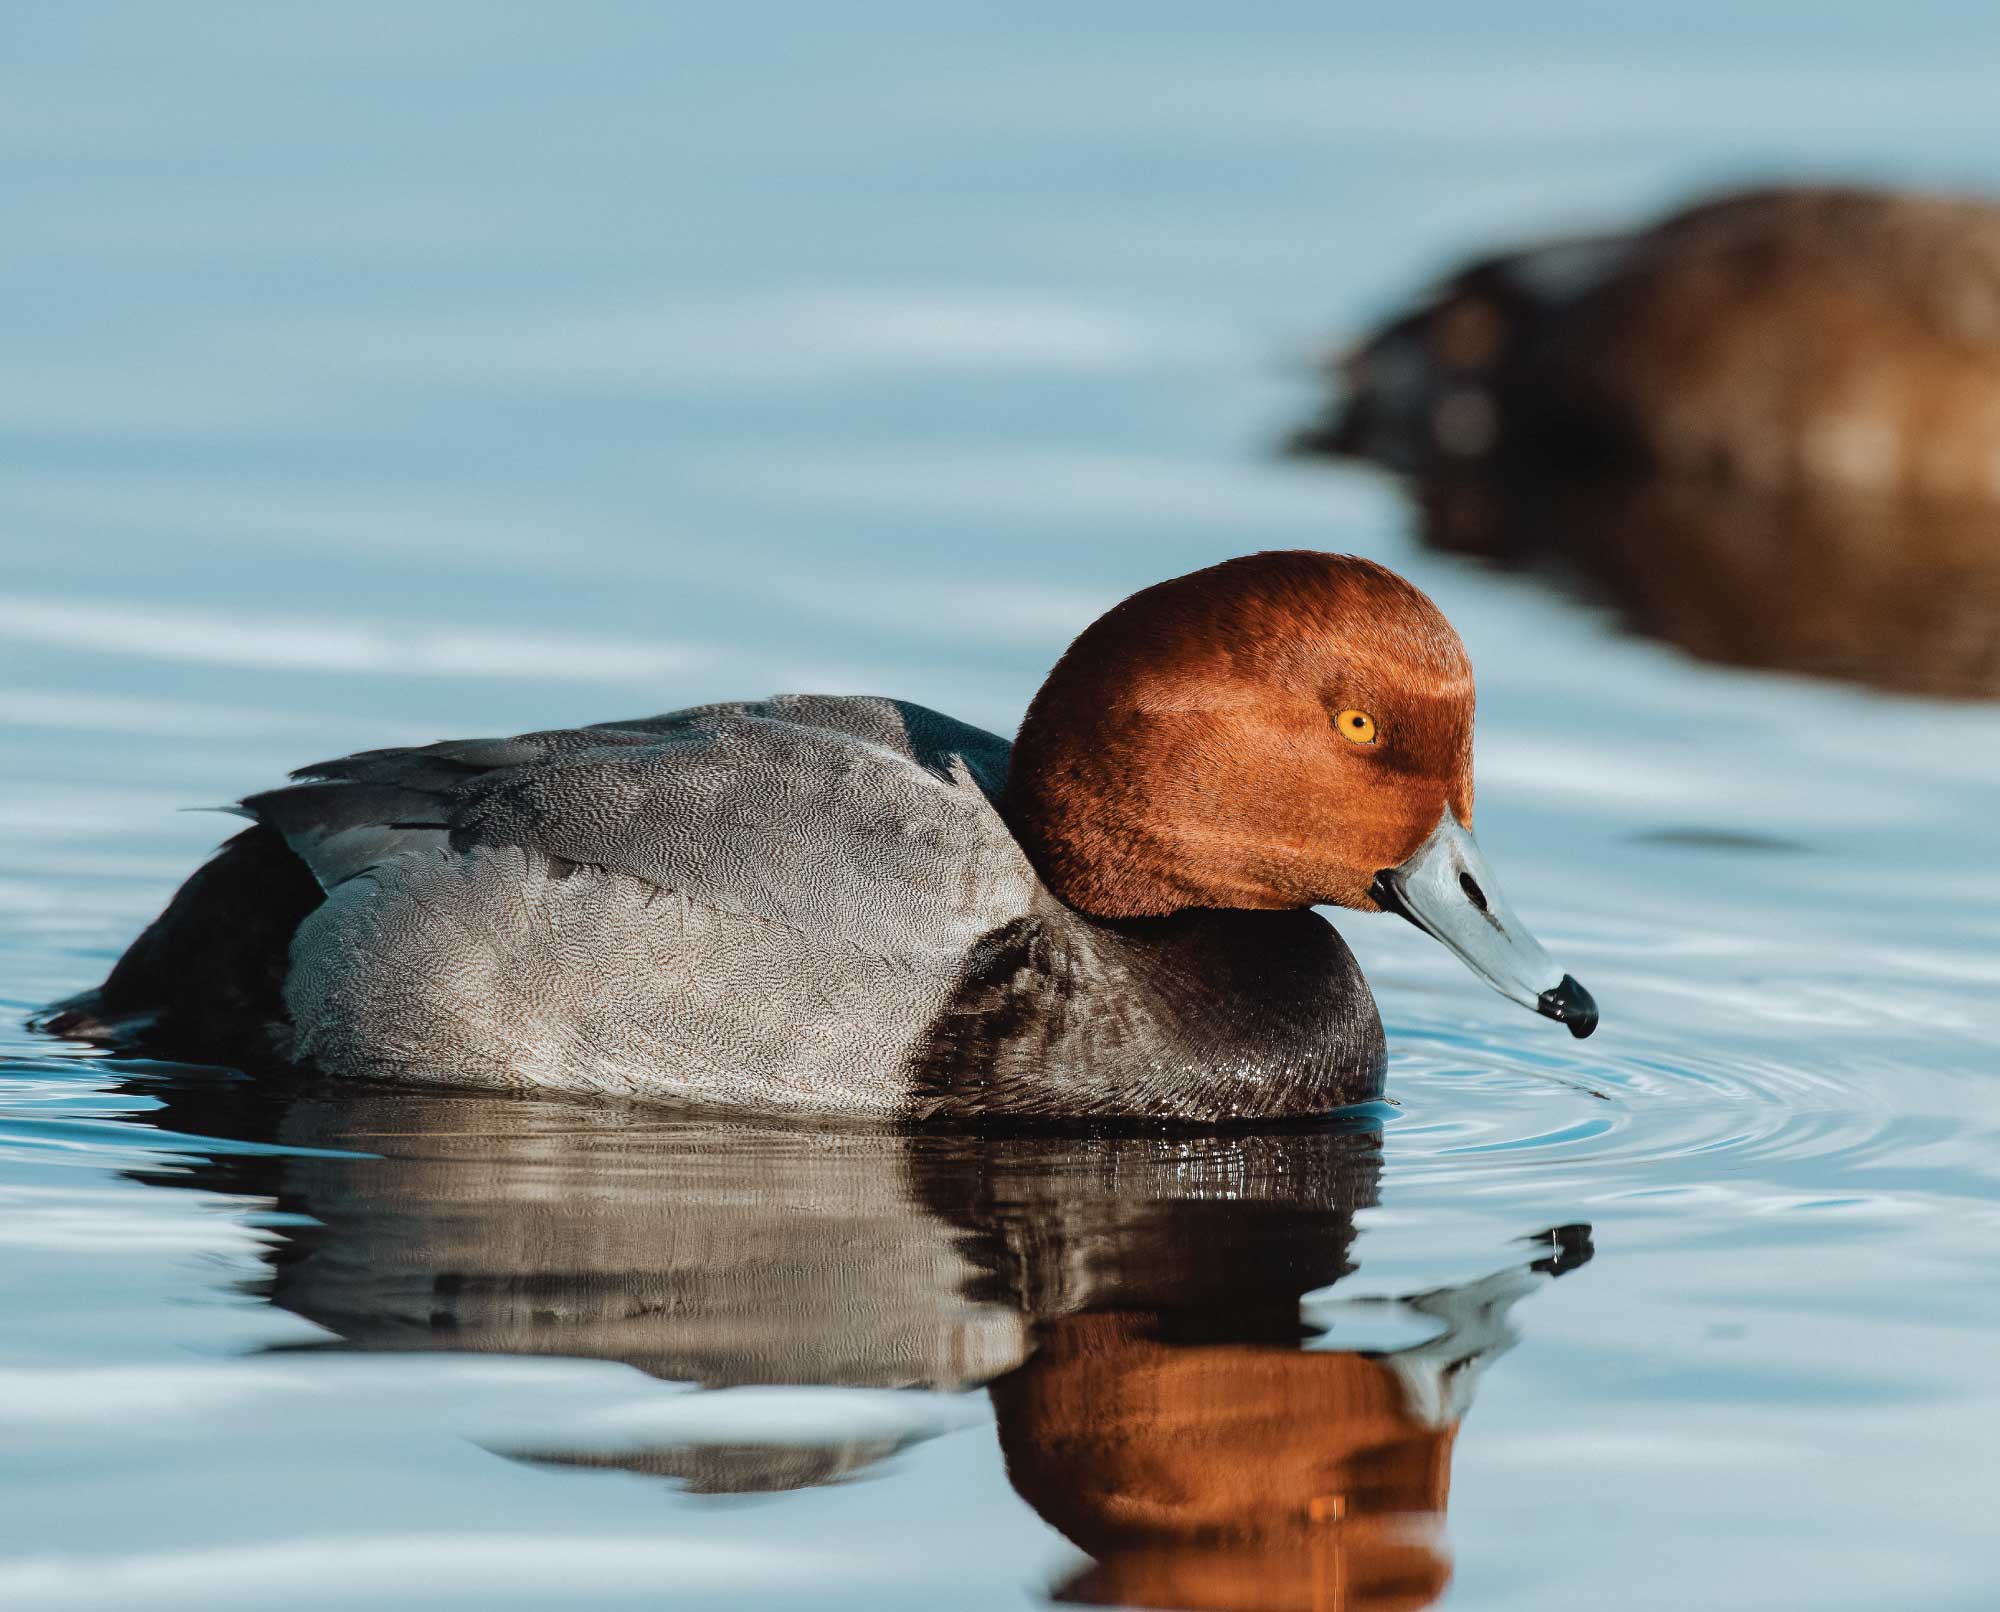 A redhead duck swims on a lake with reflection